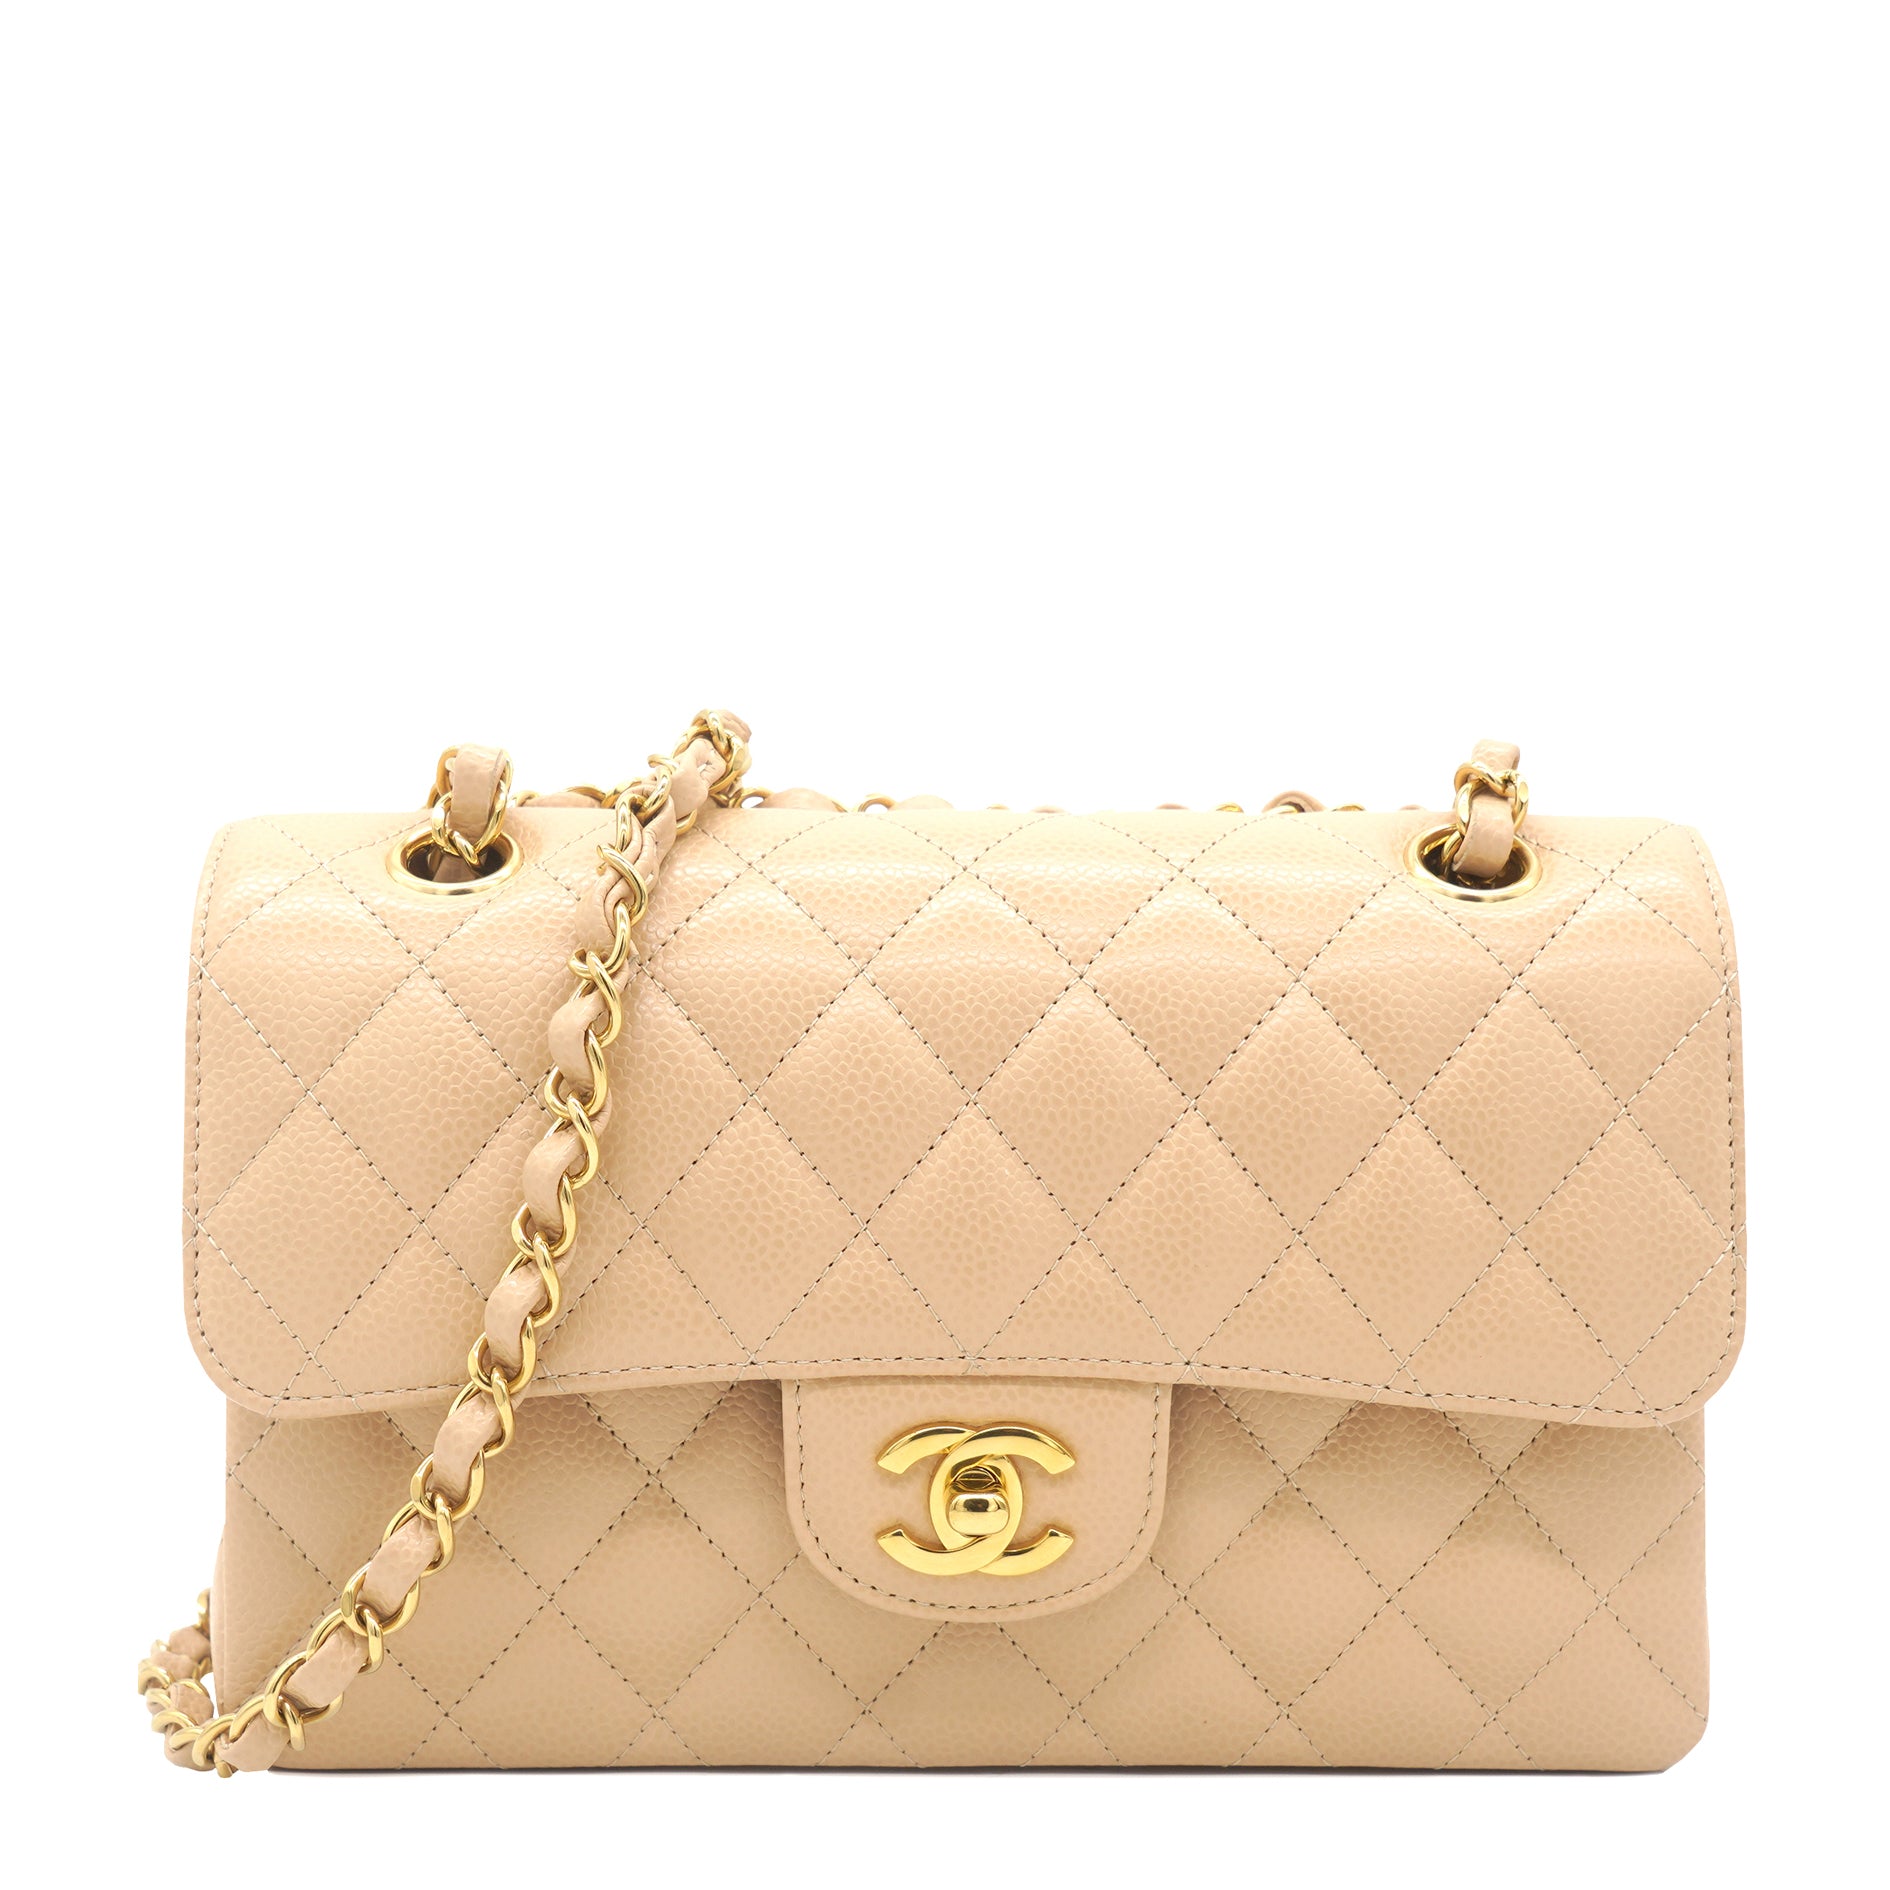 CHANEL  Bags  Sold Chanel Small Classic Flap Bag  Poshmark